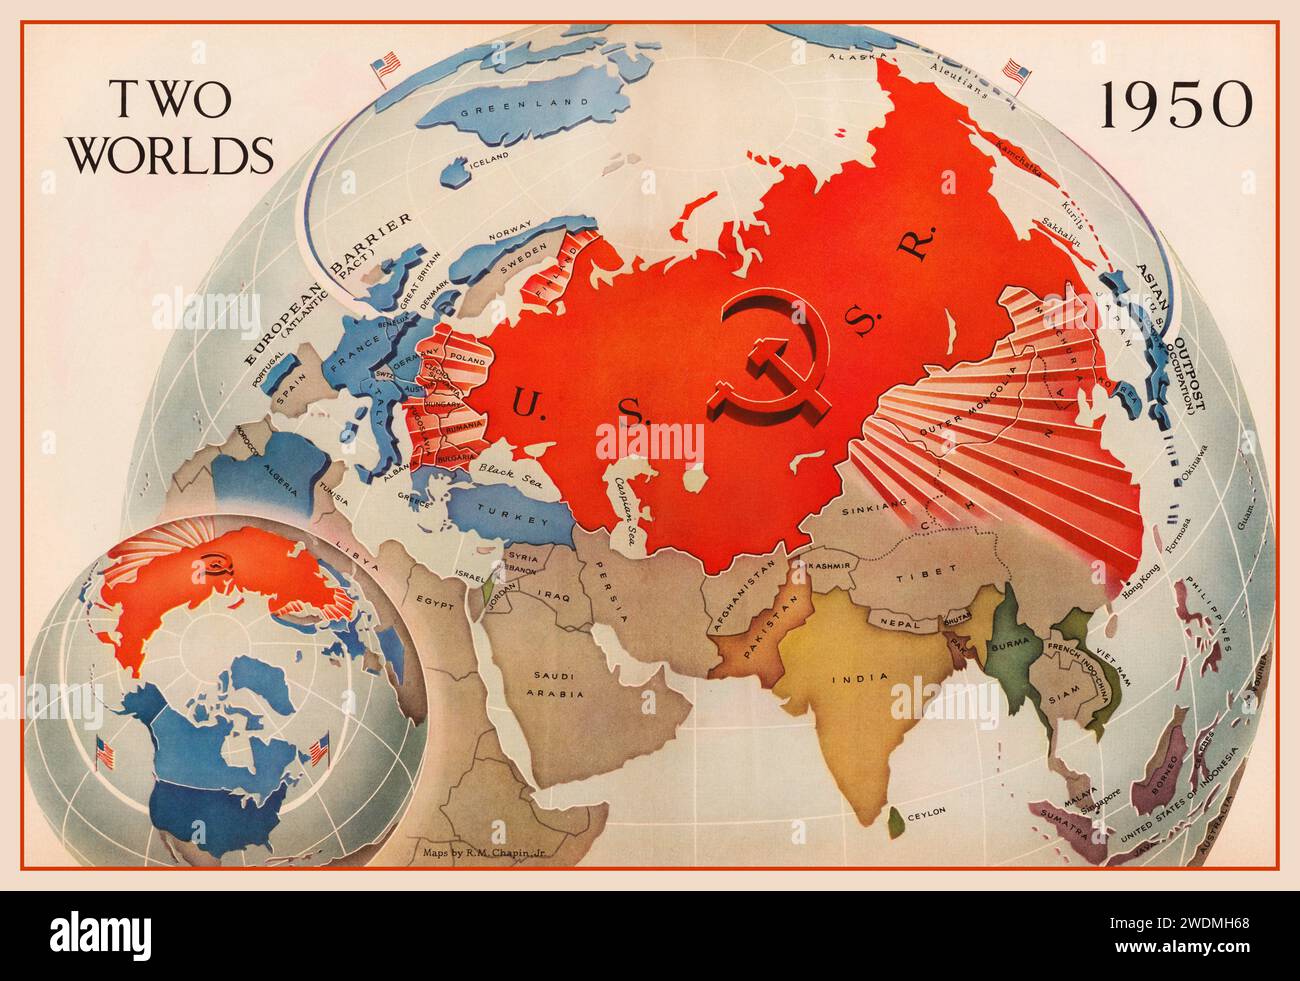 1950 USSR/USA 'Two Worlds' map, the dark red of the USSR fills the space, while the U.S. is barely visible over the horizon. Soviet hammer and sickle emblem dominates the American flag in distance. The accordion-pleated extensions of Soviet Union USSR into Eastern Europe and Asia magnify the effect. This map 'is typical of many anti-communist maps that appeared in national news journals around 1950. These maps used a north polar projection because seeing the northern latitudes emphasized the closeness of the USSR Soviet Union to the United States. Stock Photo